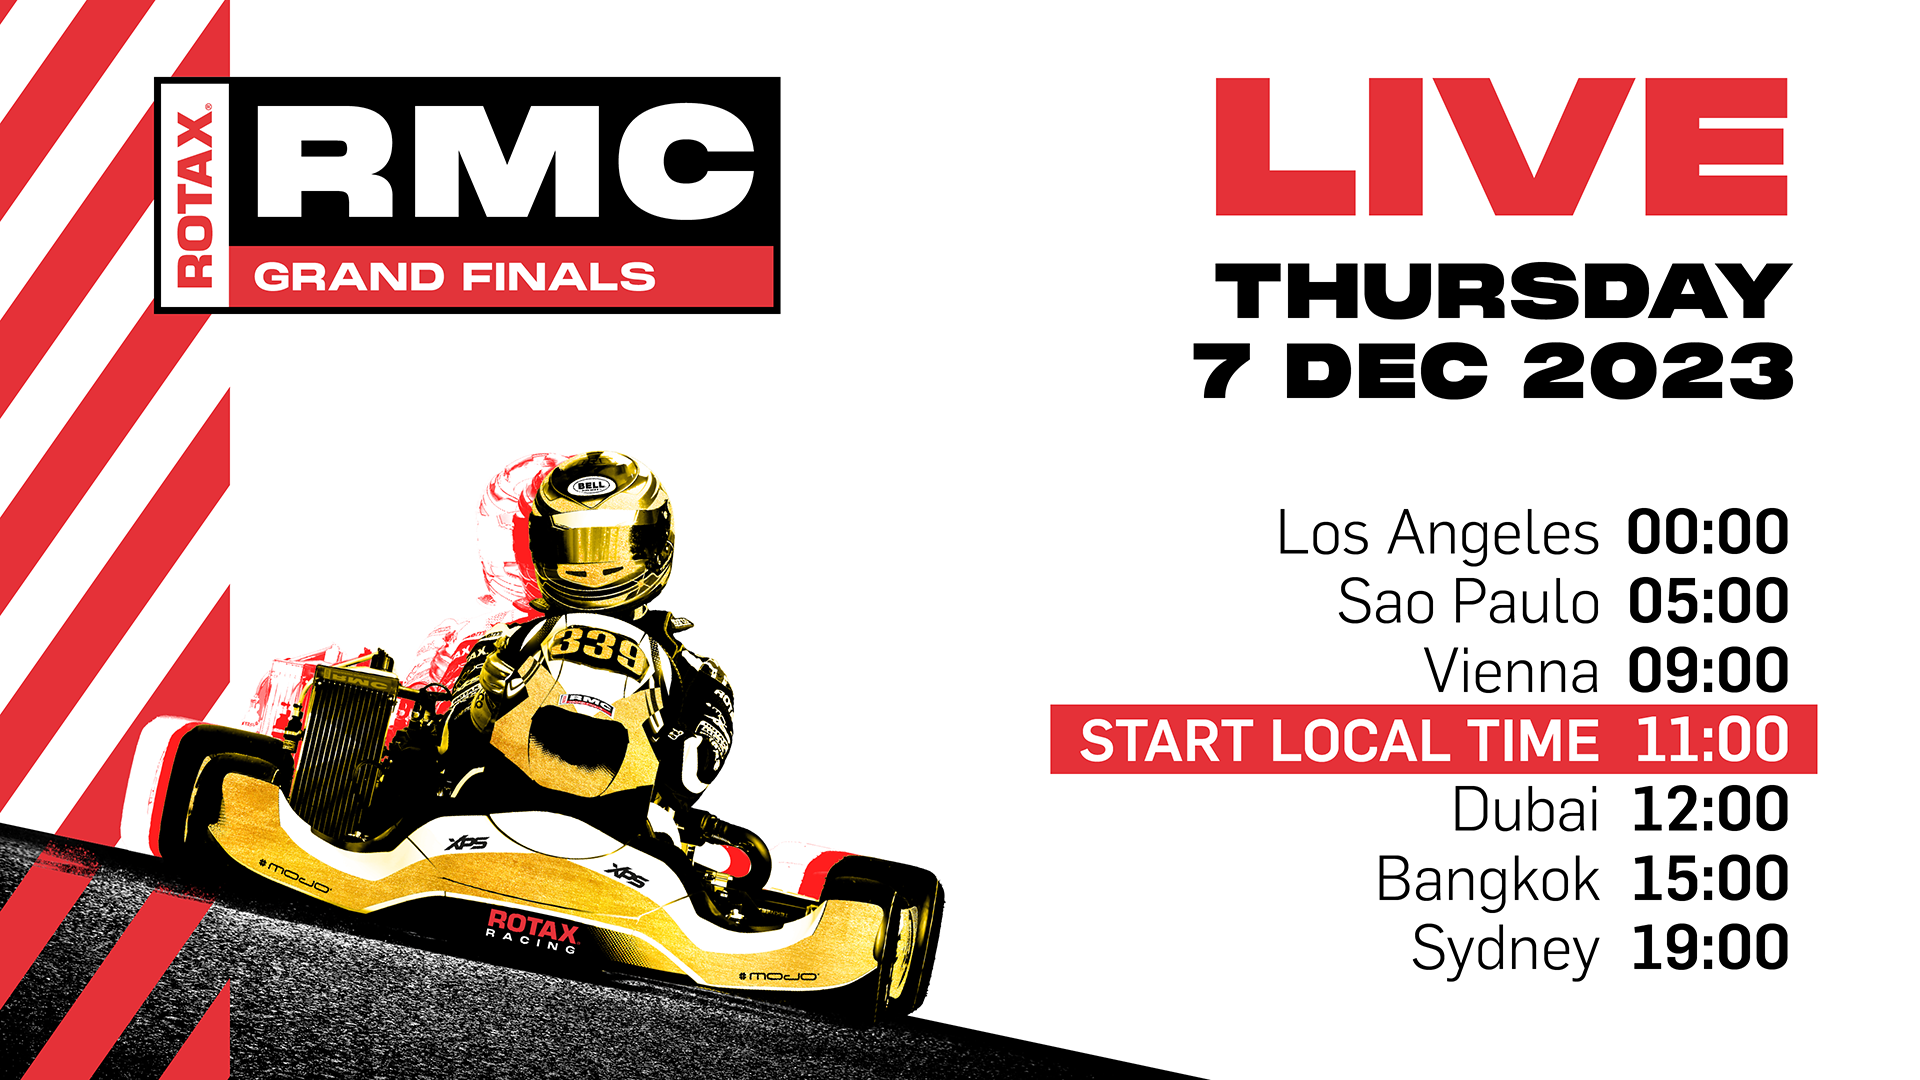 ROTAX RMCGF 2023 You Tube Channel LIVE TV 1920x1080px 07 12